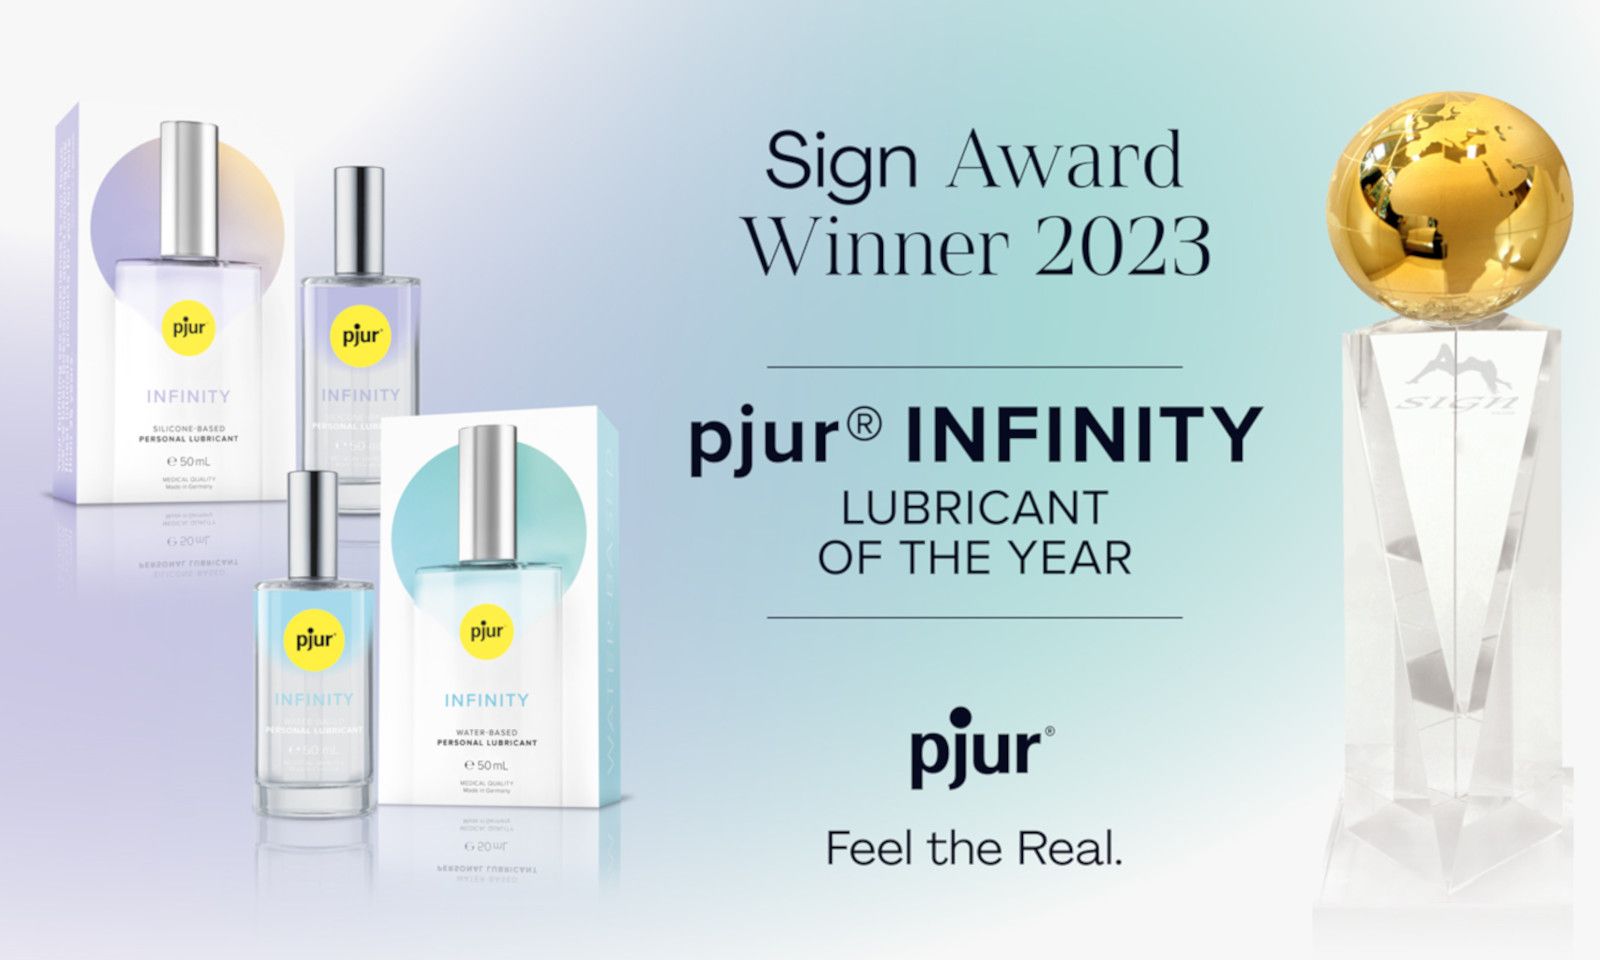 pjur Infinity Named Lubricant of the Year by SIGN Magazine